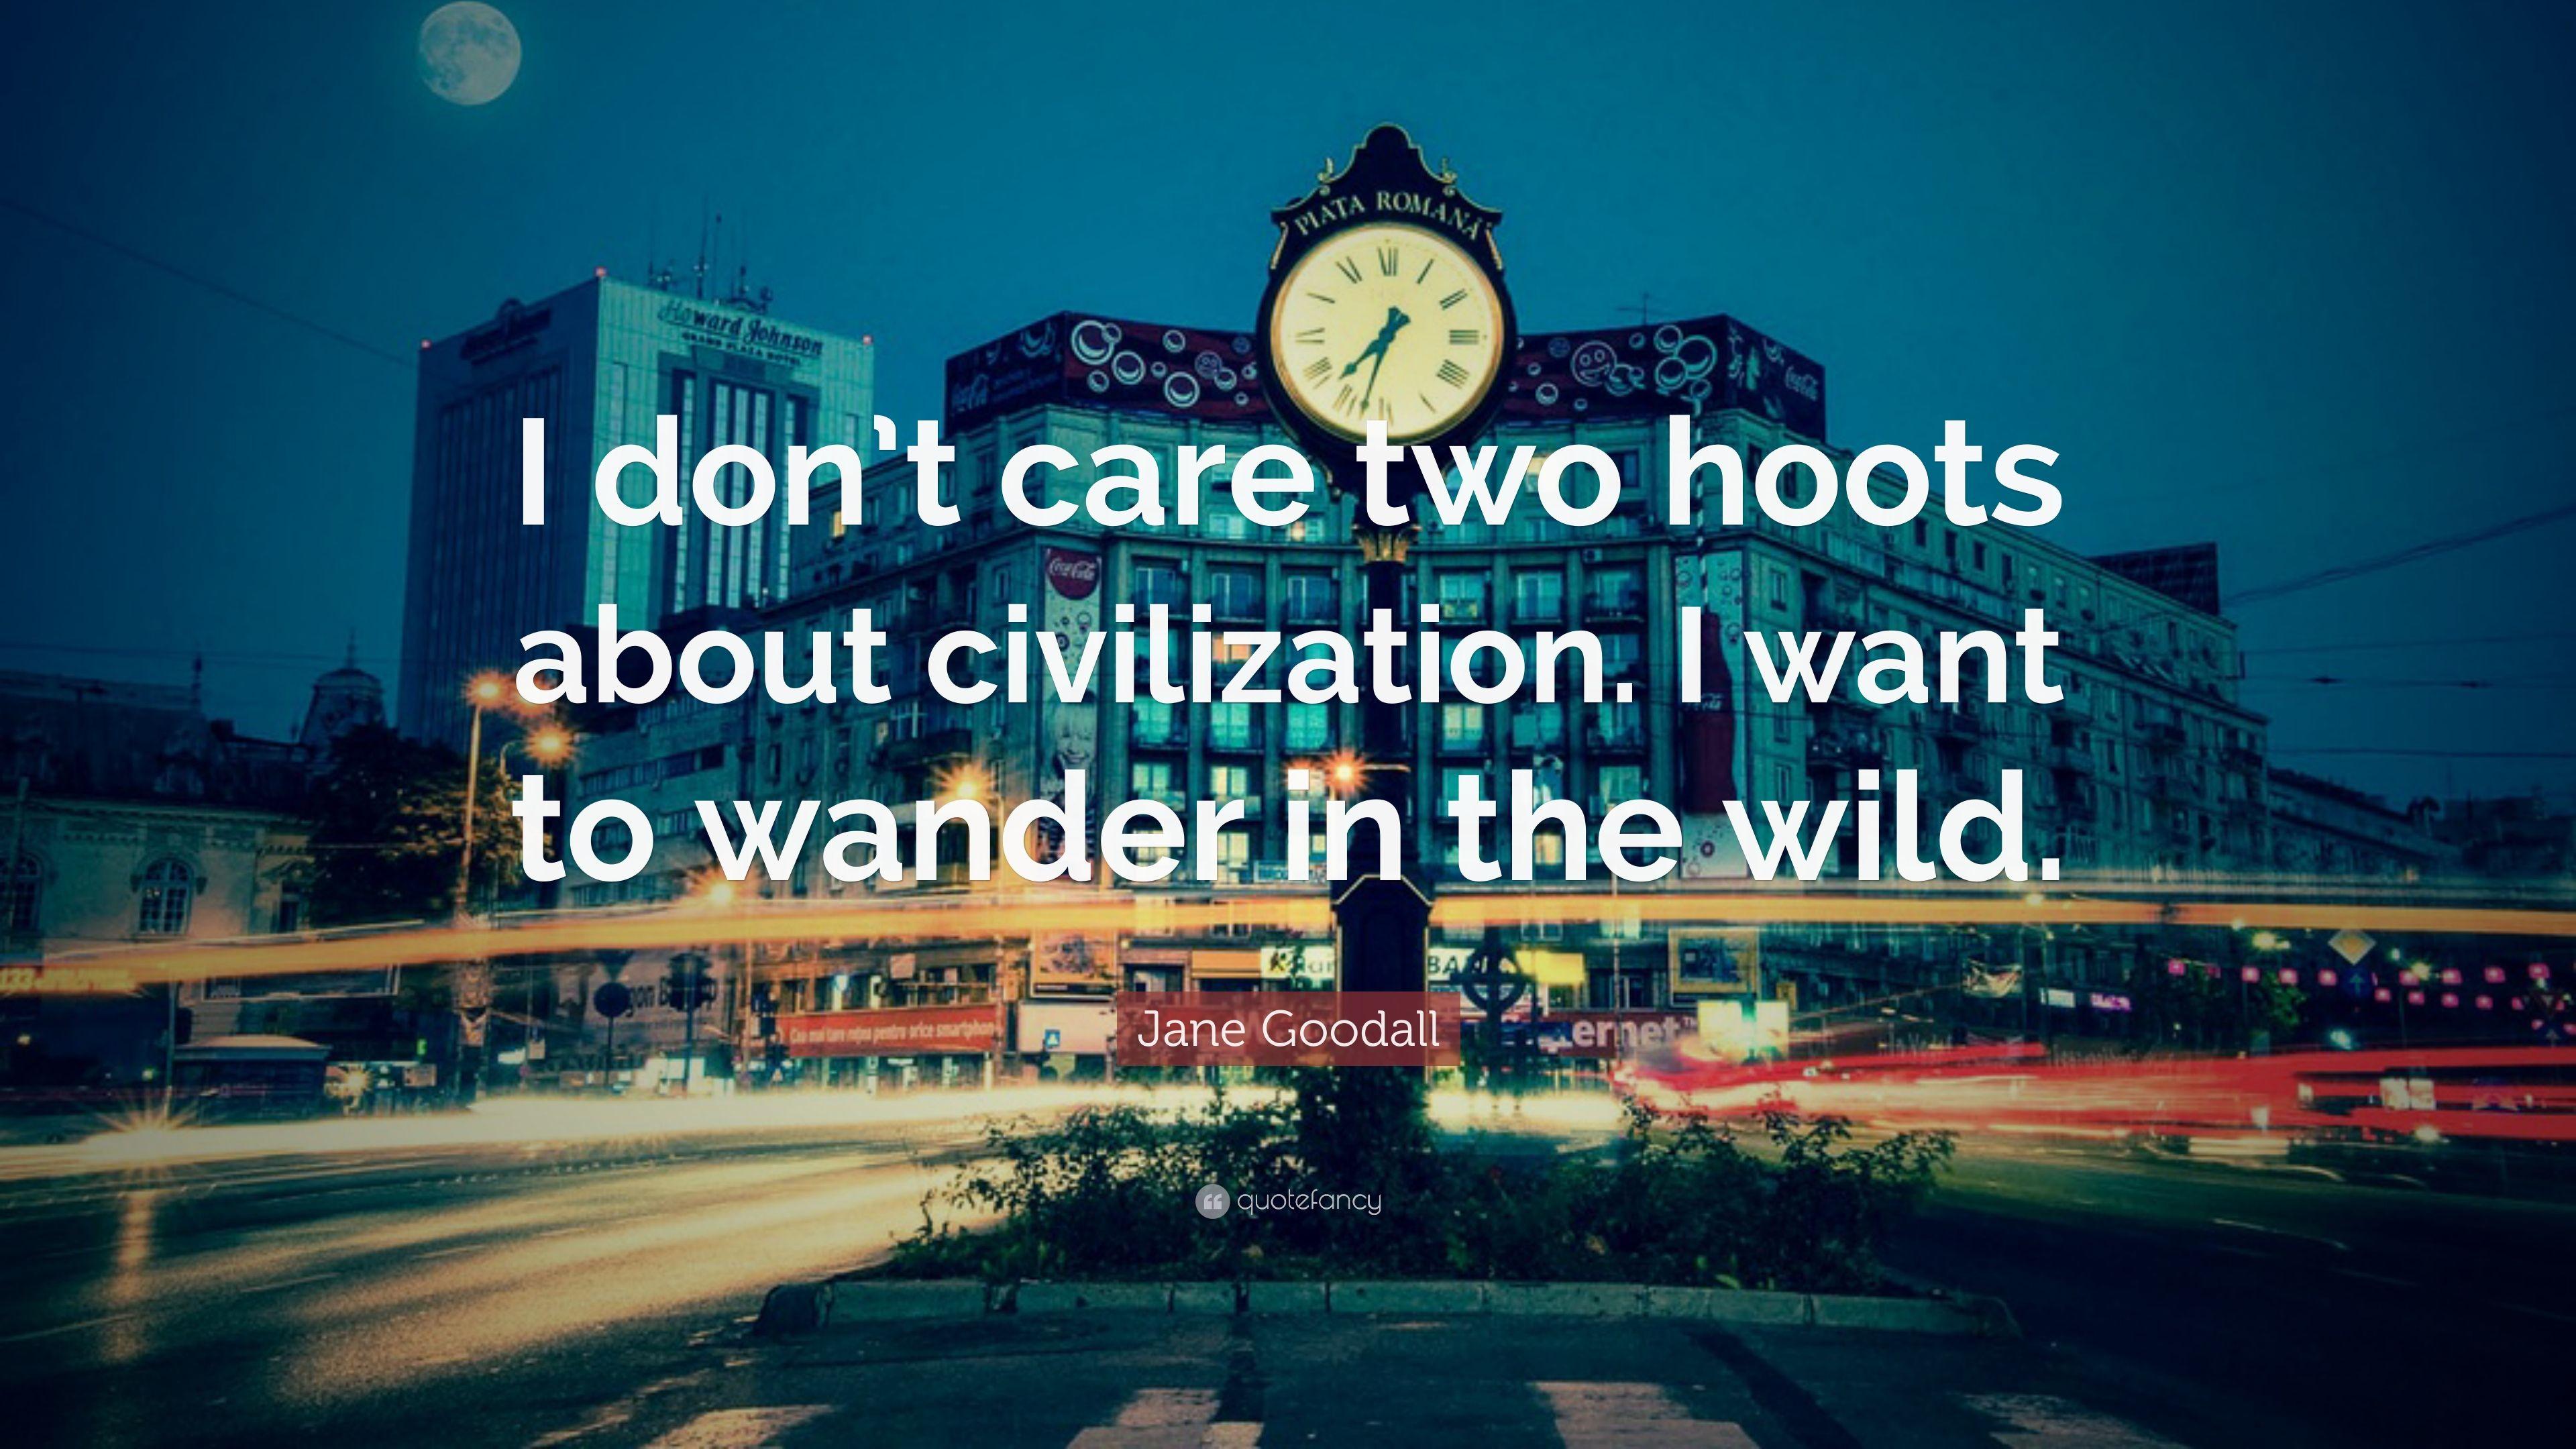 Jane Goodall Quote: “I don't care two hoots about civilization. I